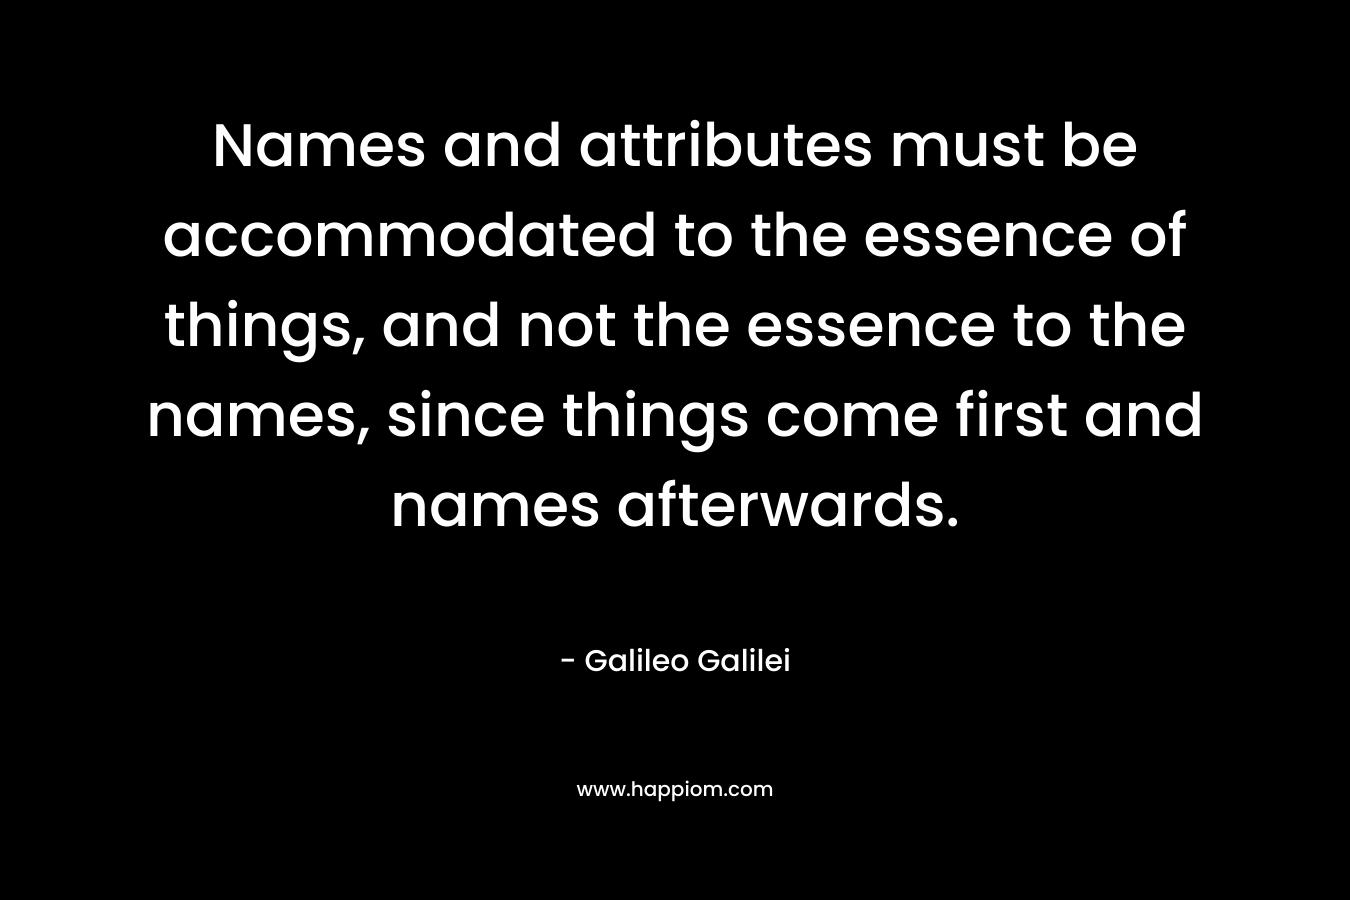 Names and attributes must be accommodated to the essence of things, and not the essence to the names, since things come first and names afterwards.